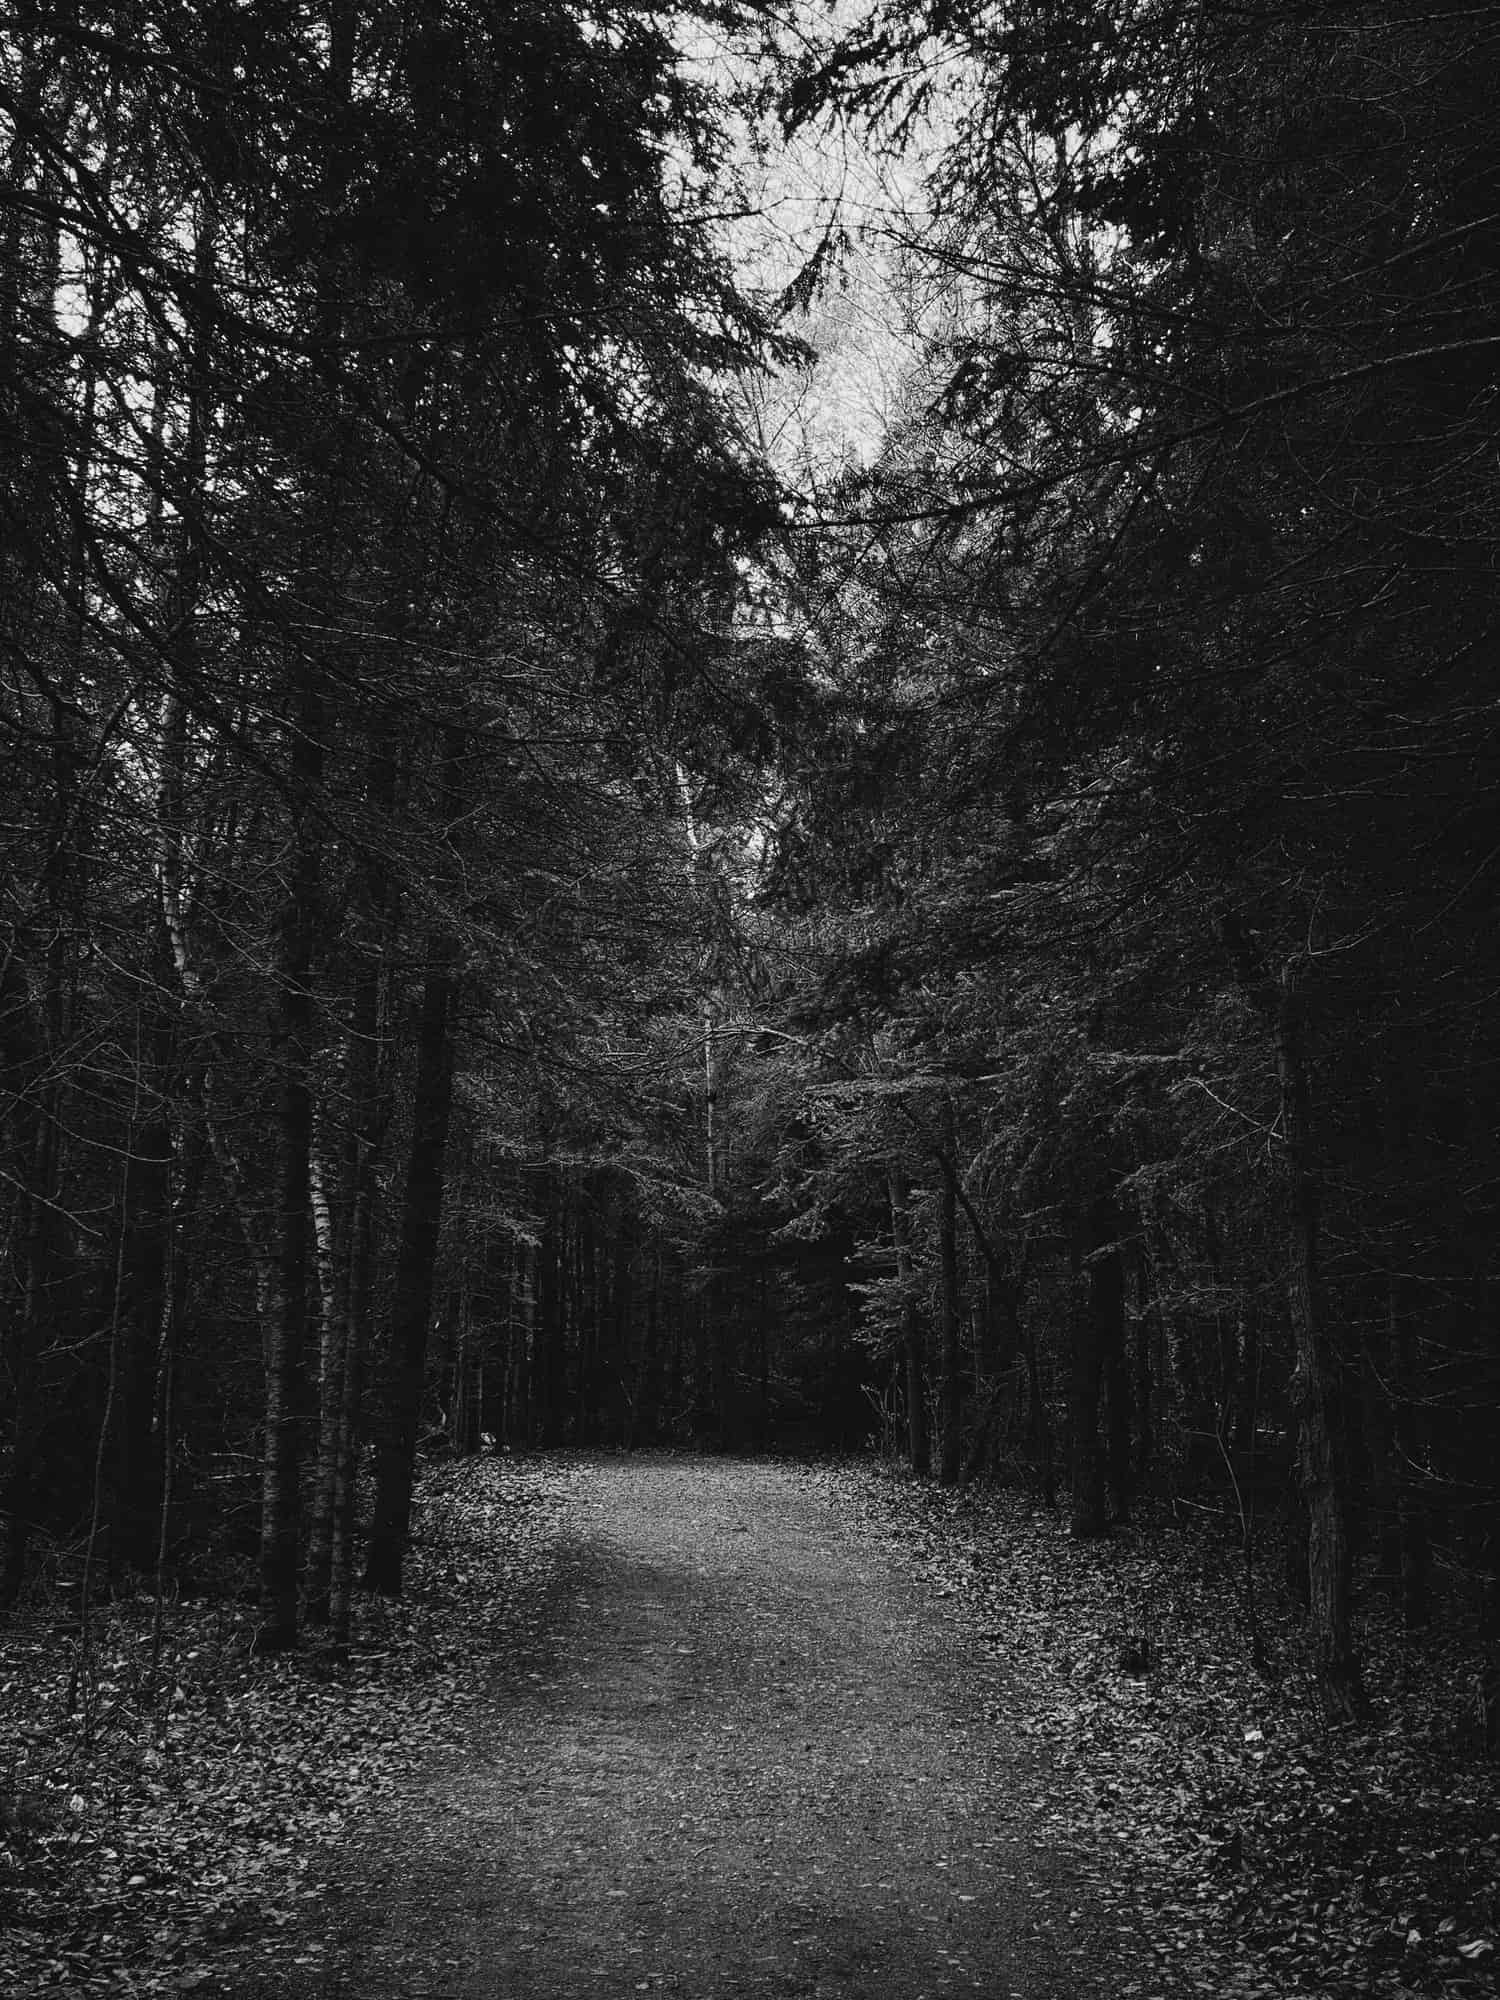 Black and white photograph of a dirt path leading between dense pine trees.